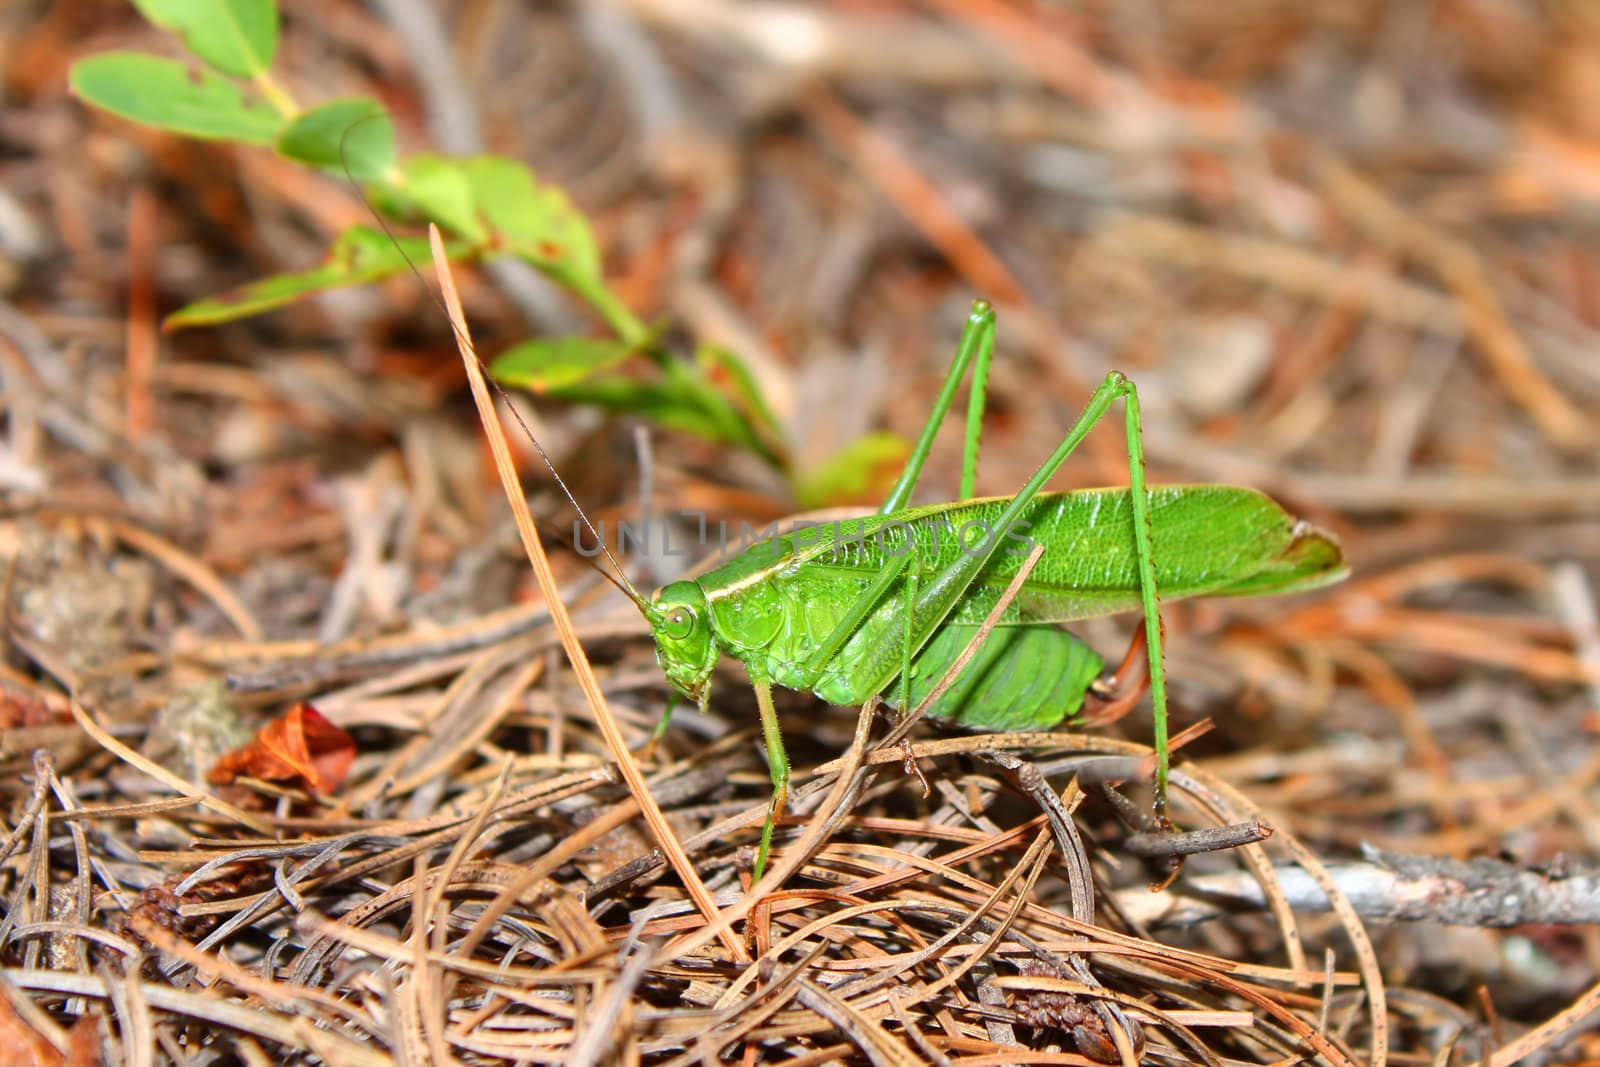 Fork-tailed Bush Katydid (Scudderia furcata) in the Northern Highland American Legion State Forest of Wisconsin.